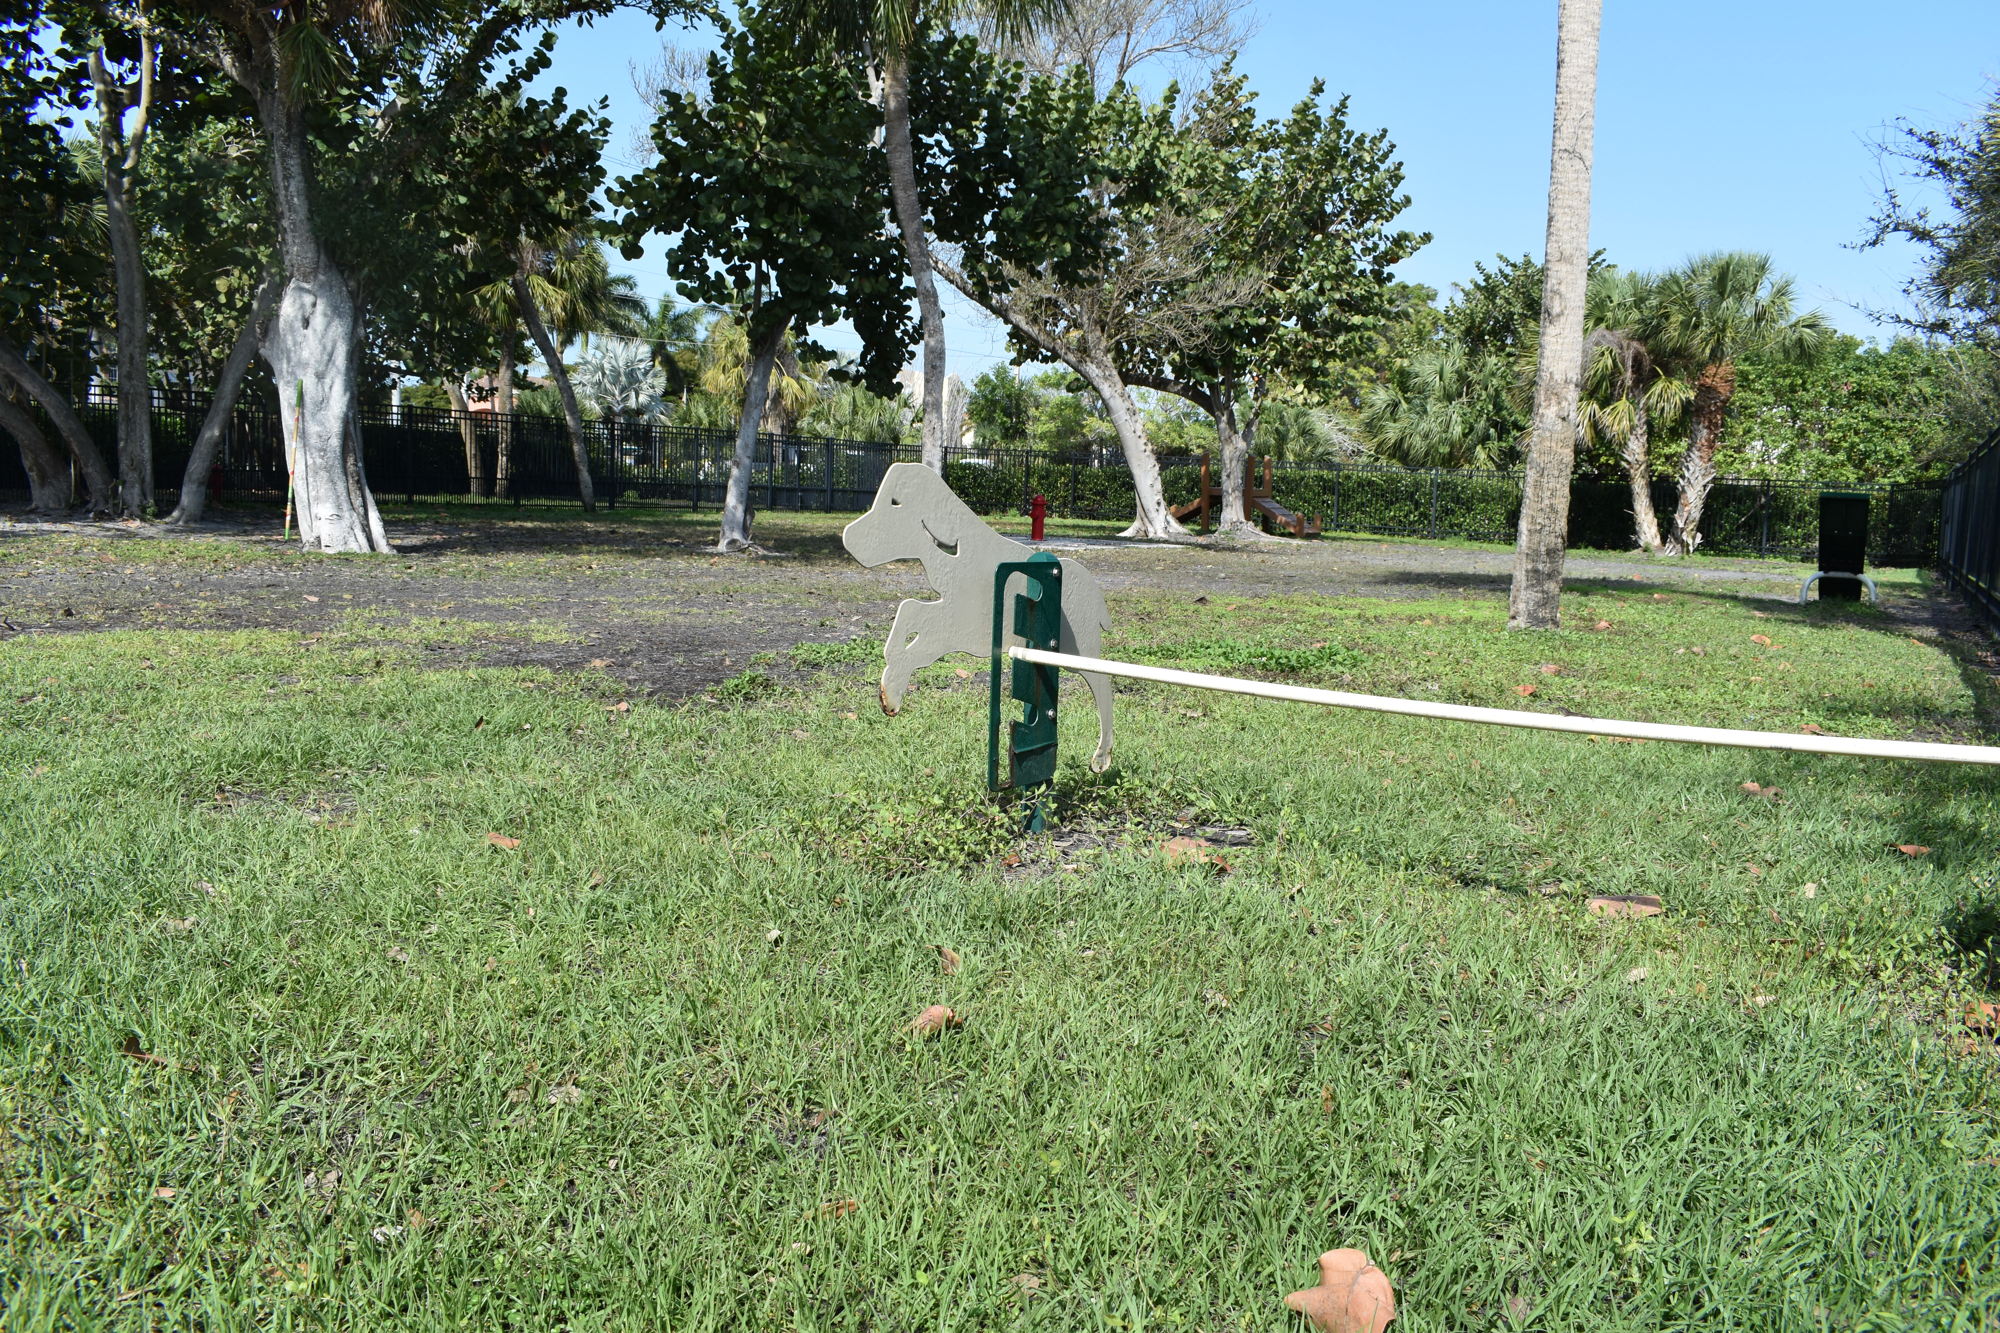 Bayfront Park’s dog park is the only place on Longboat Key where dogs can legally roam unleashed.